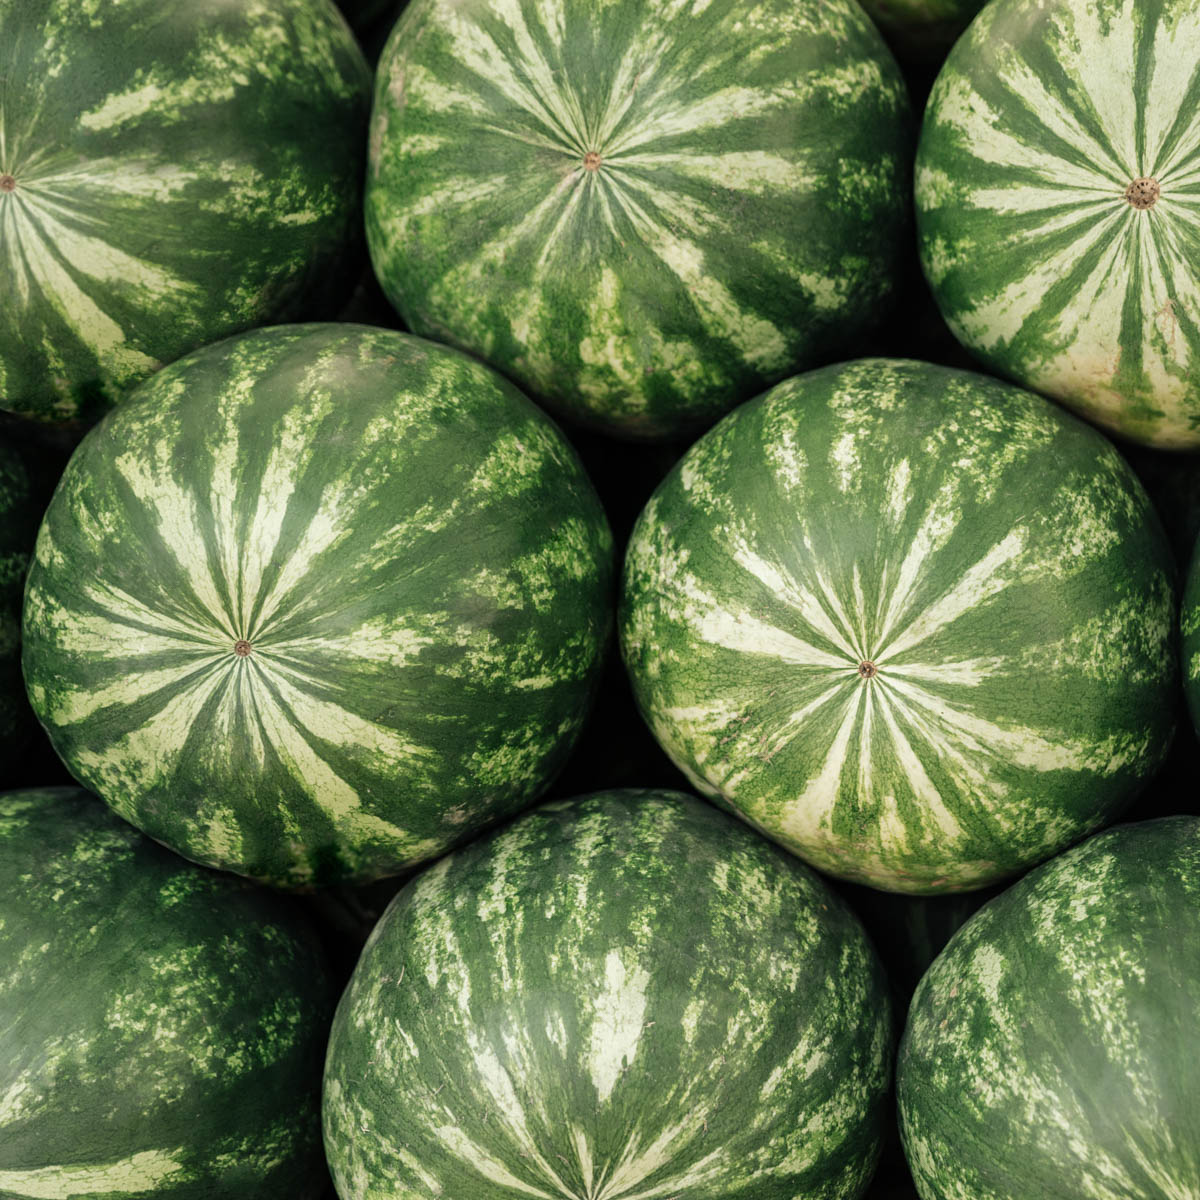 Bunch of whole watermelons stacked on top of each other.